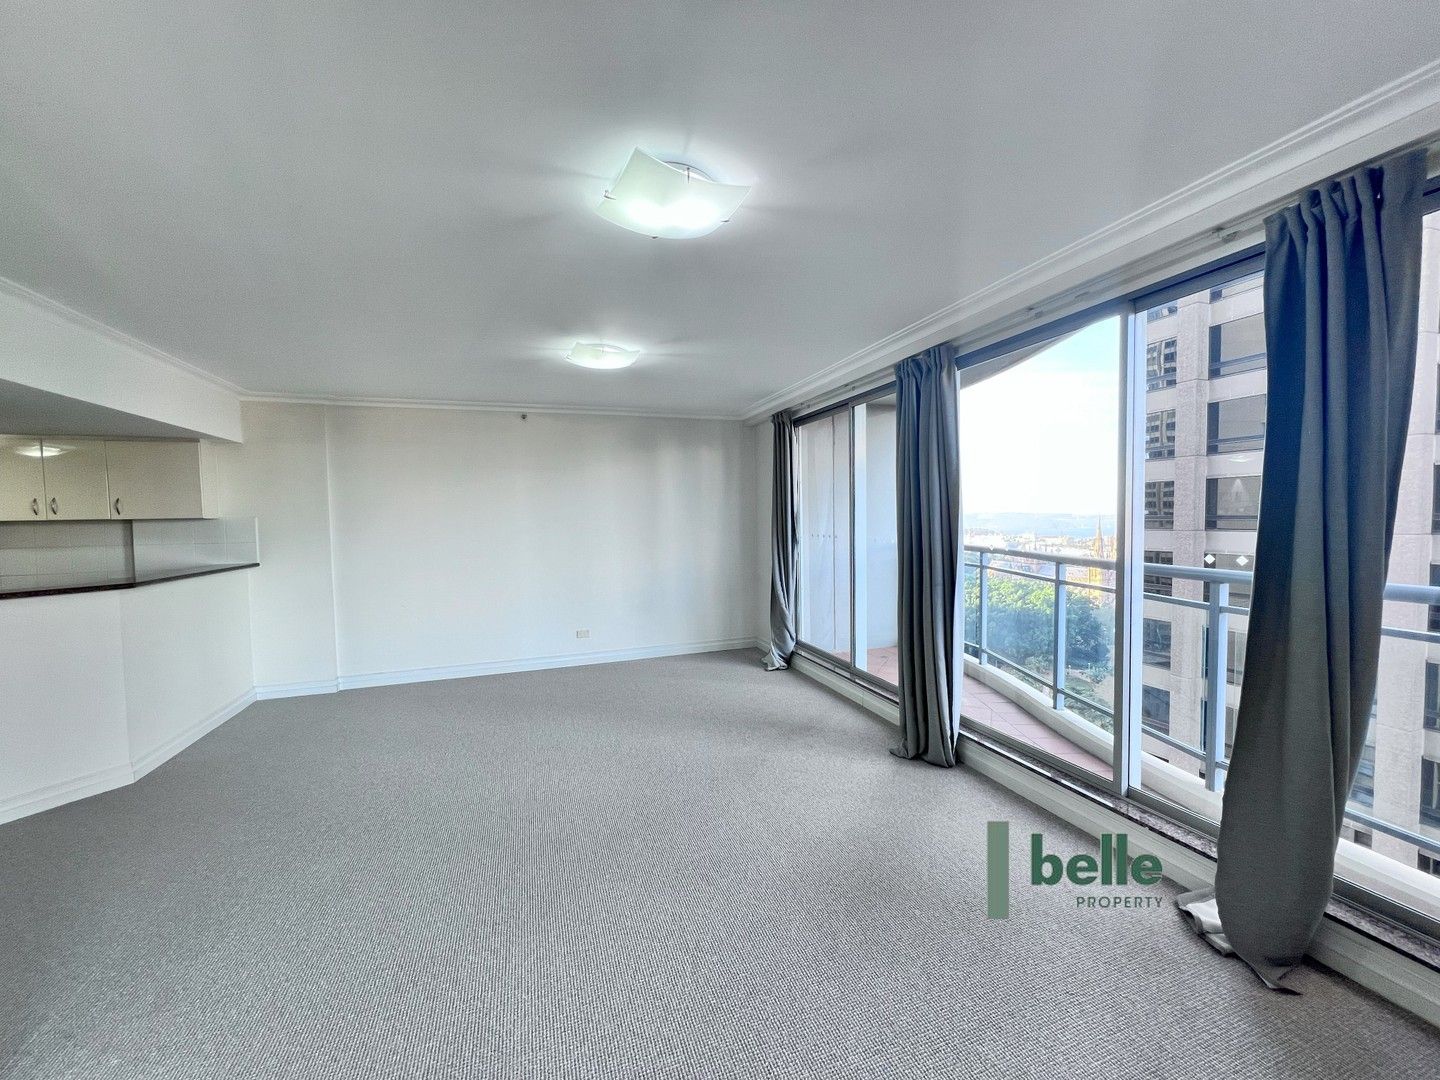 2 bedrooms Apartment / Unit / Flat in 2403/197-199 Castlereagh Street SYDNEY NSW, 2000